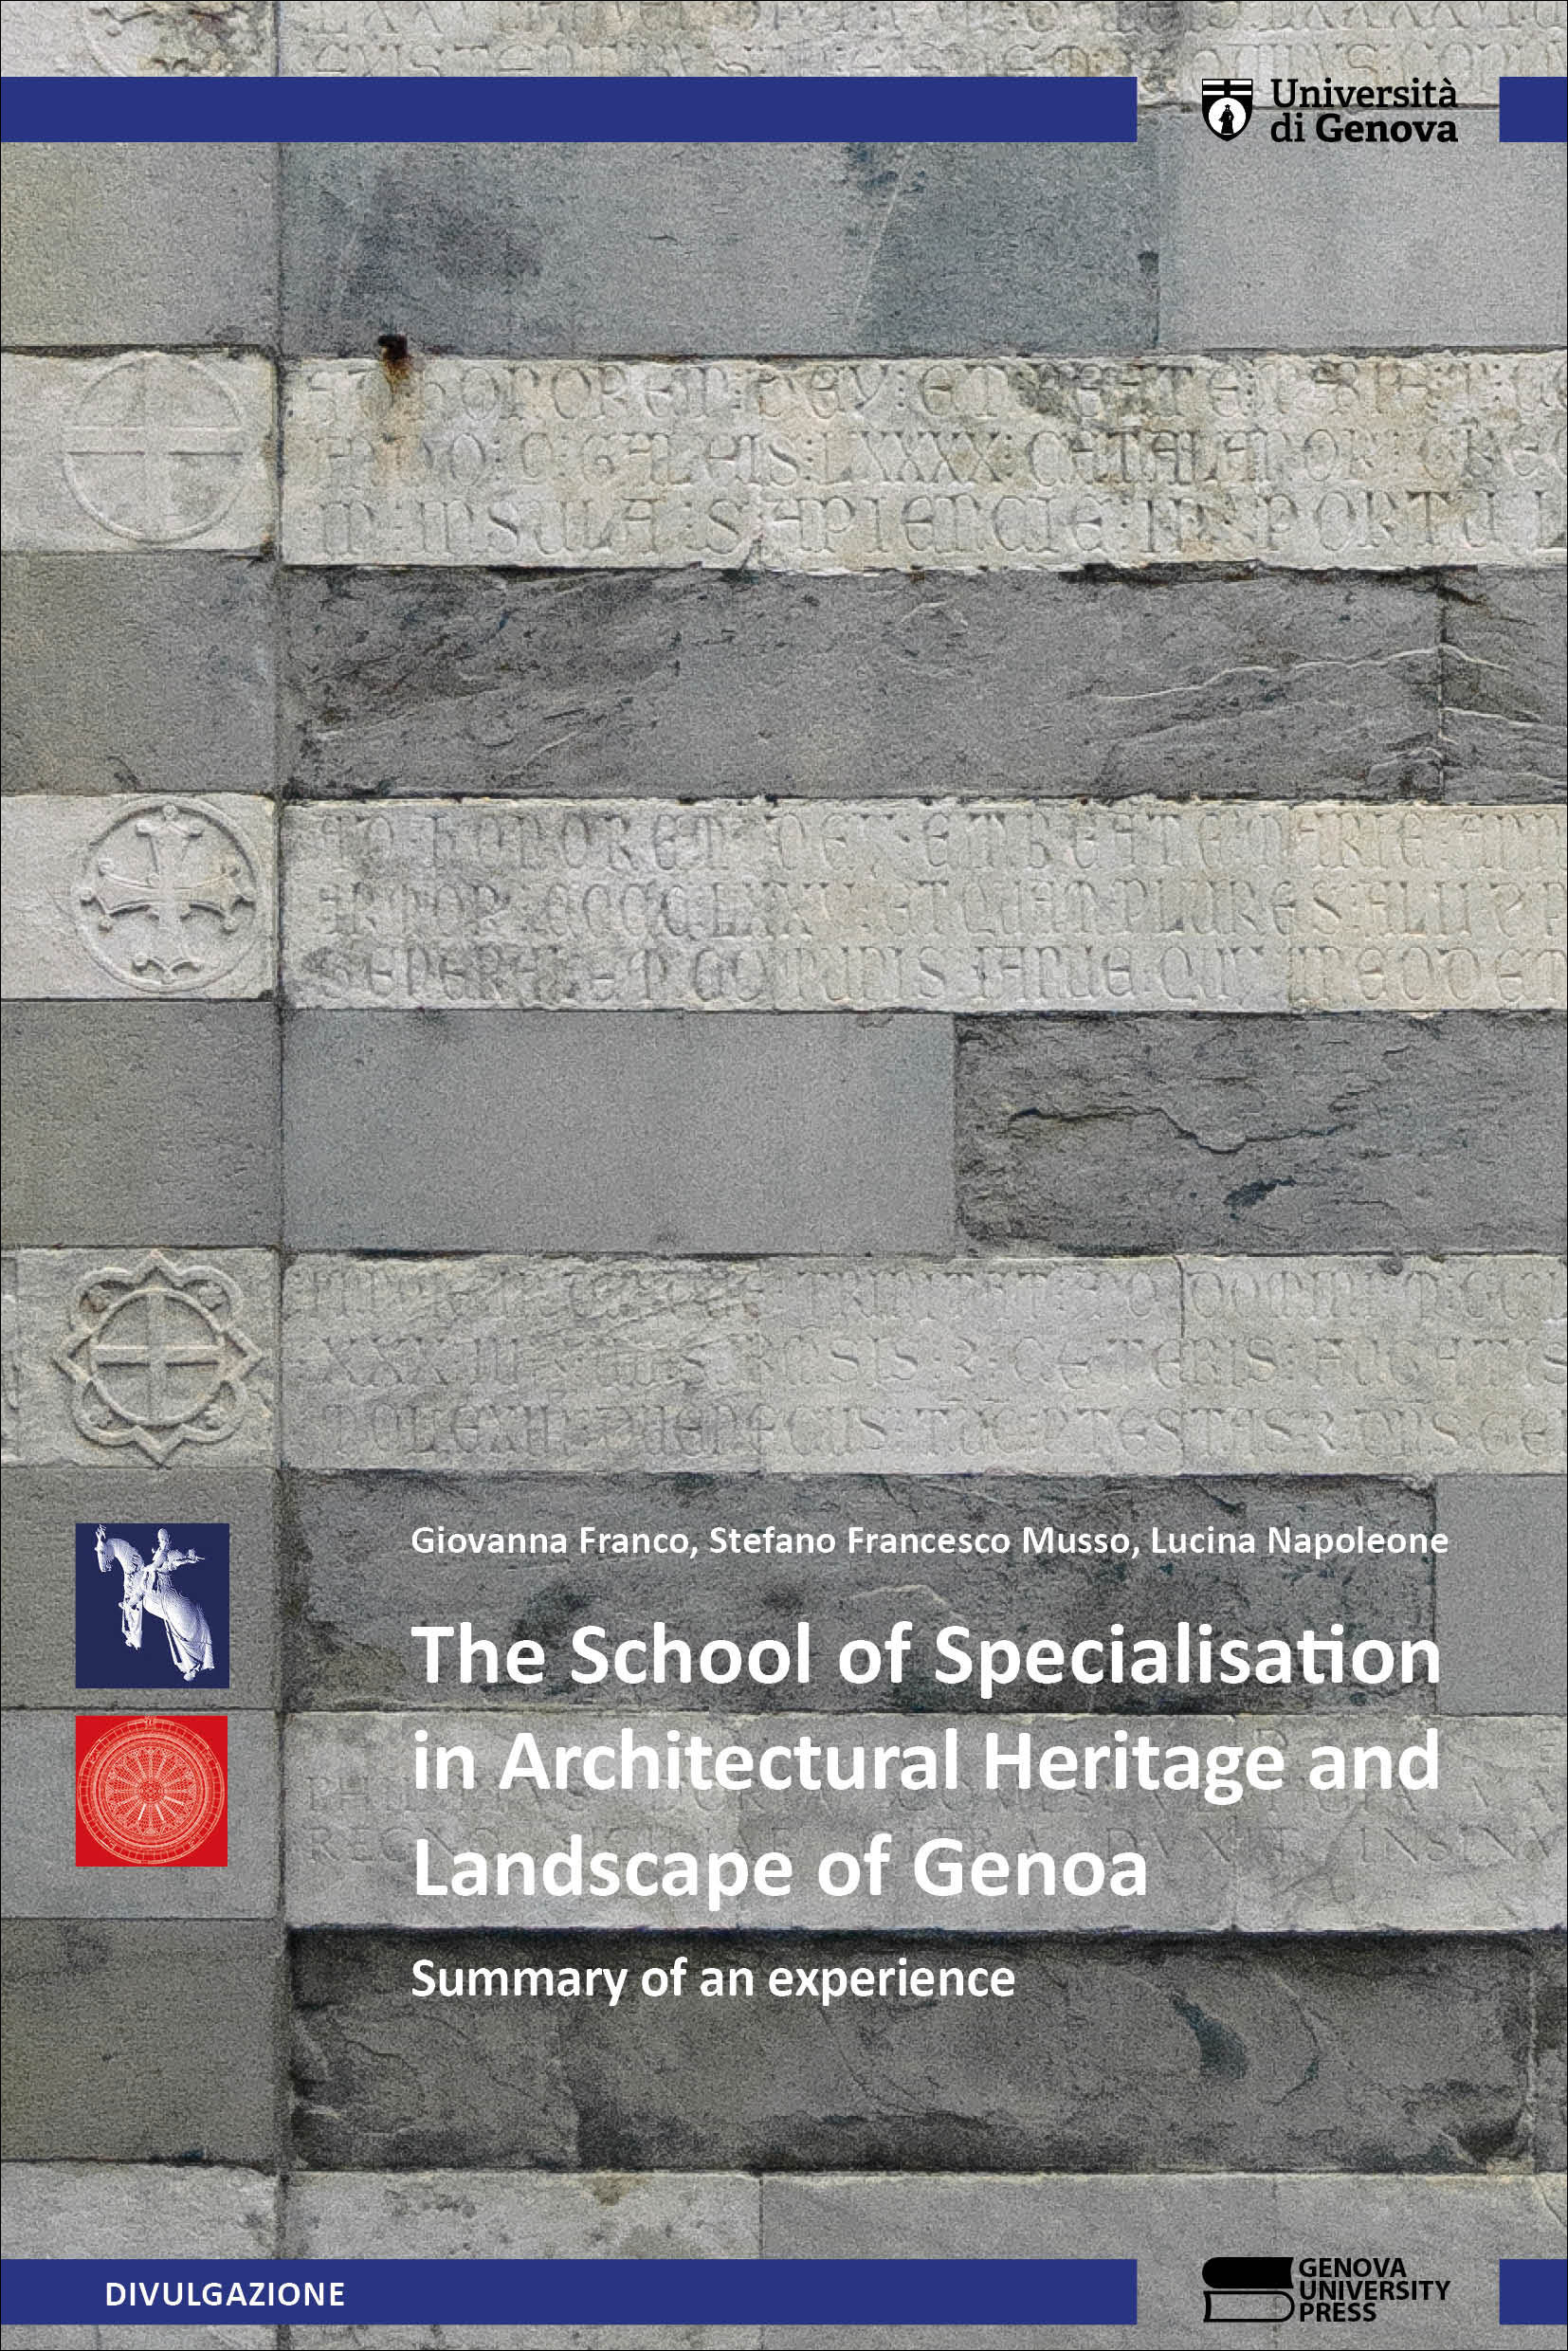 The School of Specialisation in Architectural Heritage and Landscape of Genoa